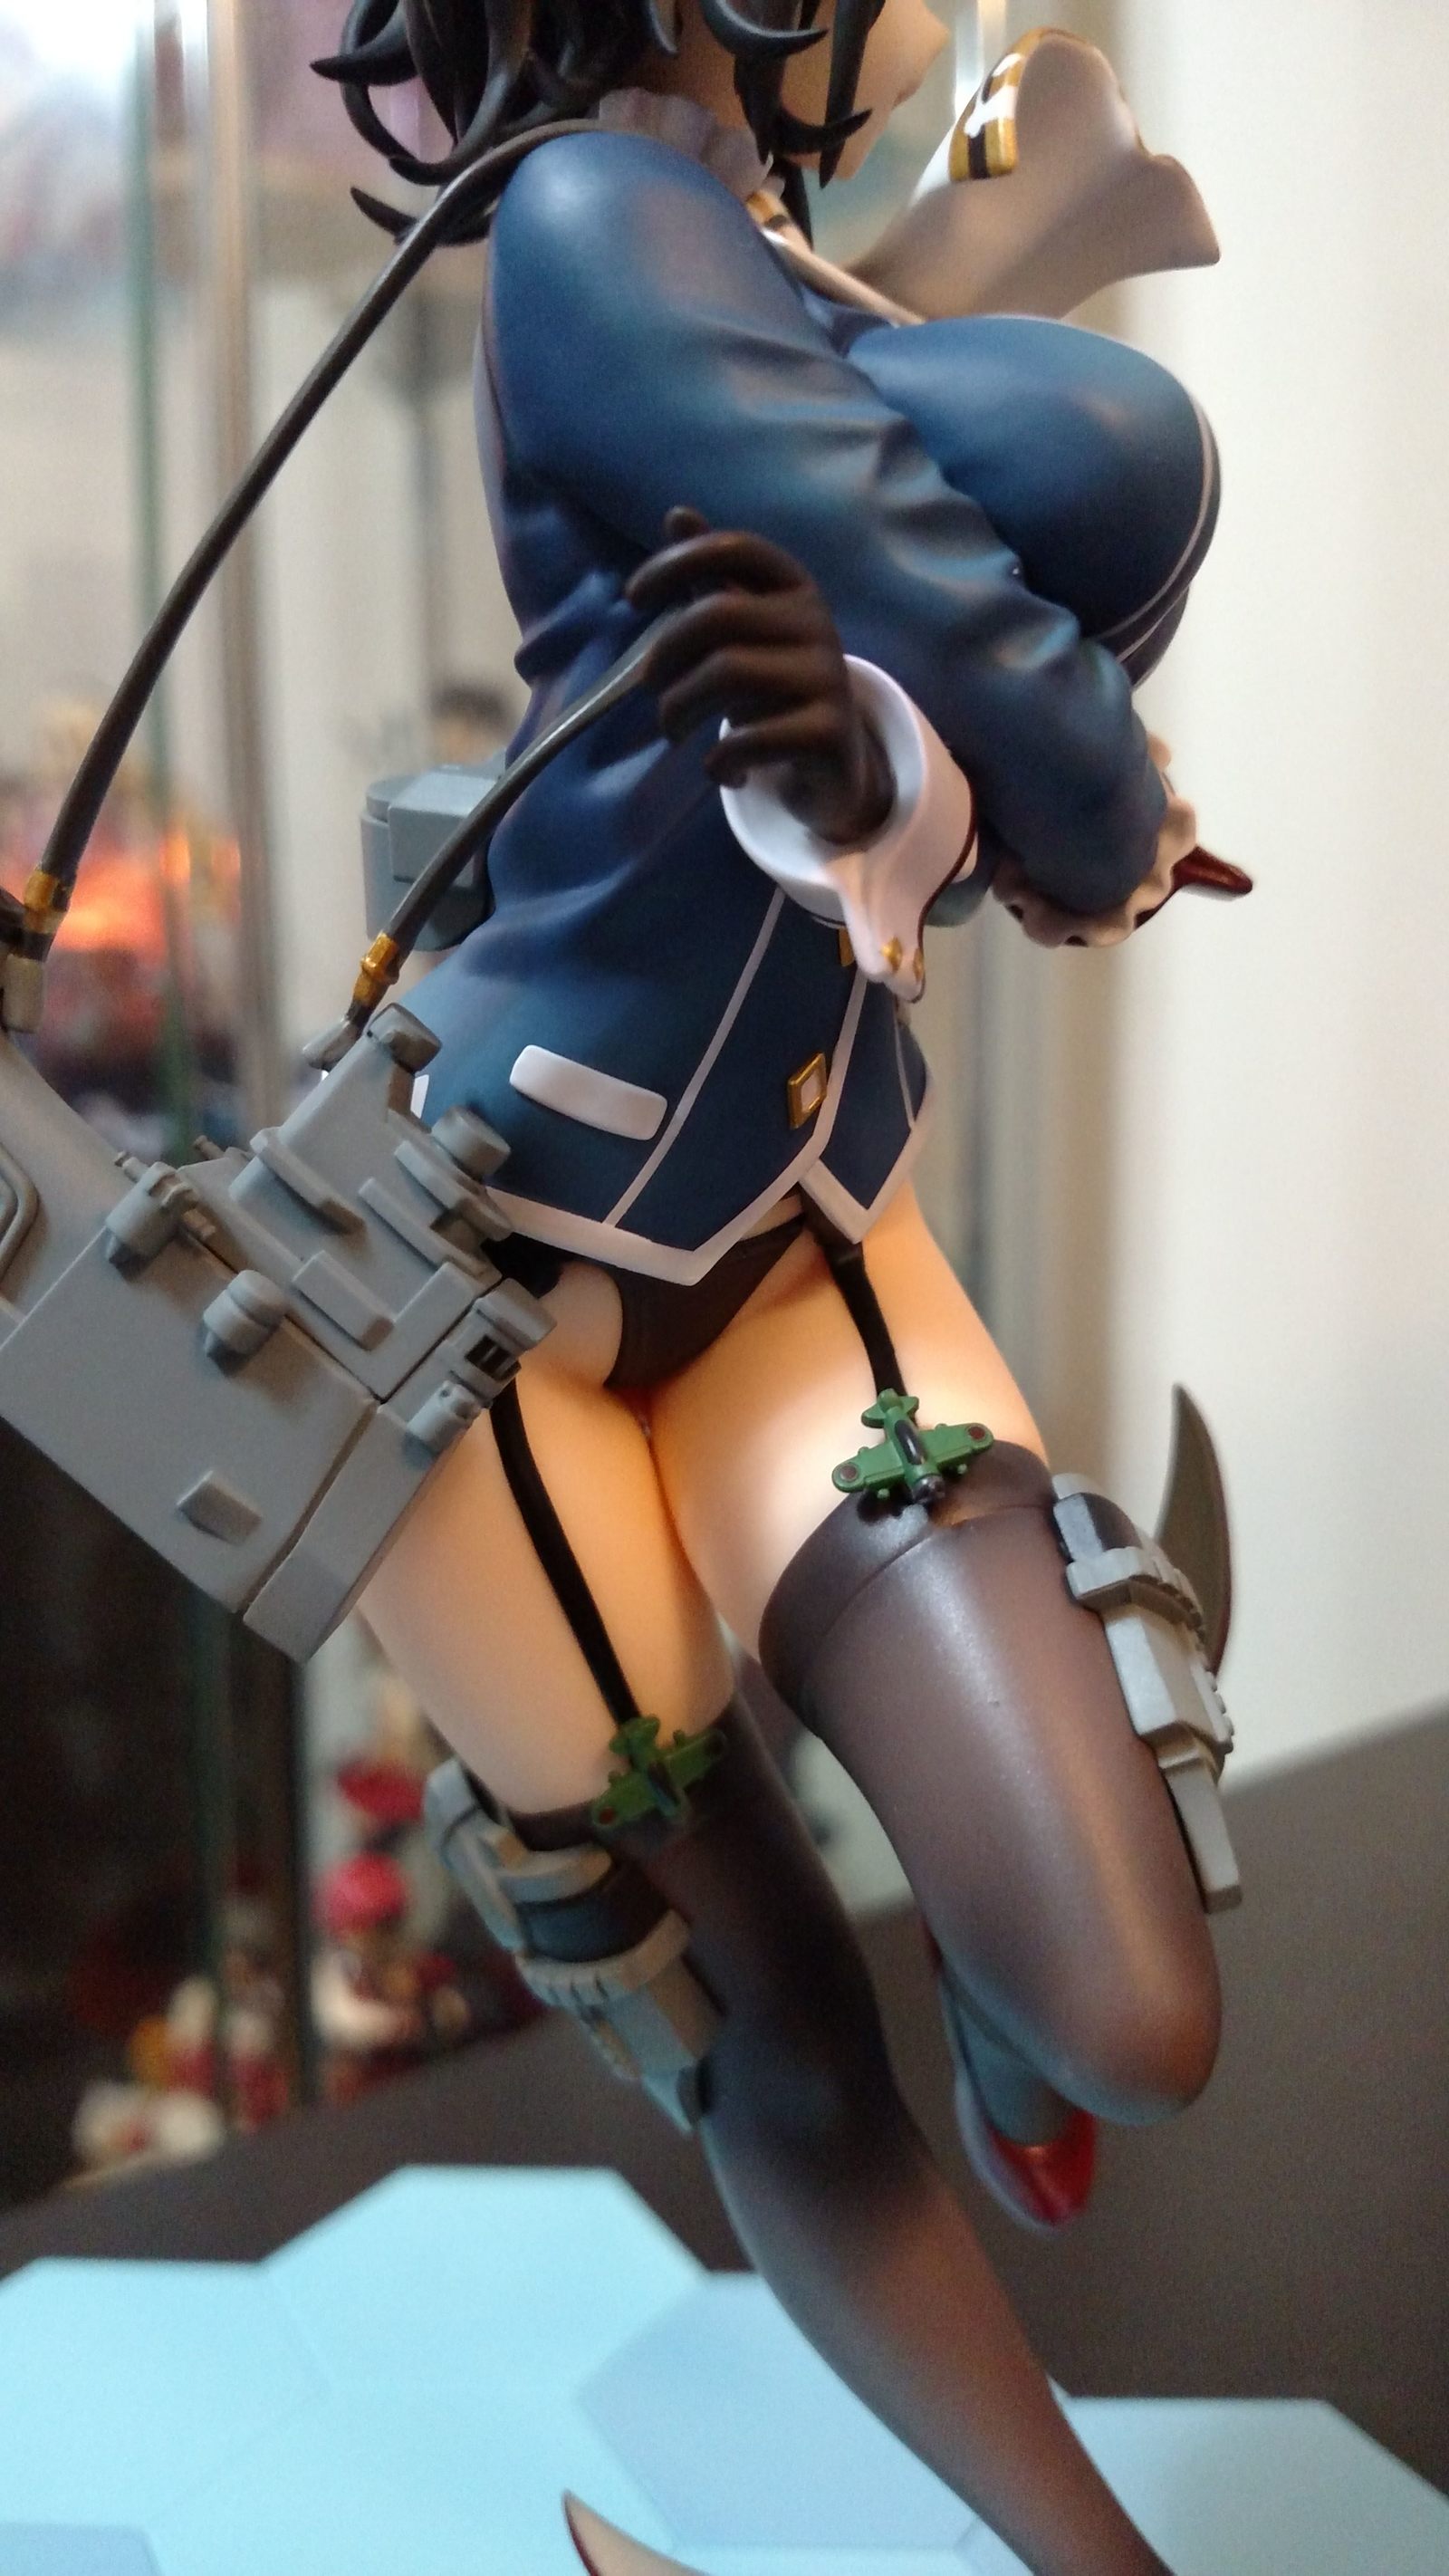 Tragedy: Sea base runs out of living space due to curvaceous forms of some kanmusu - NSFW, Kantai collection, , Figurine, Atago, Takao, Anime, Booty, Longpost, Figurines